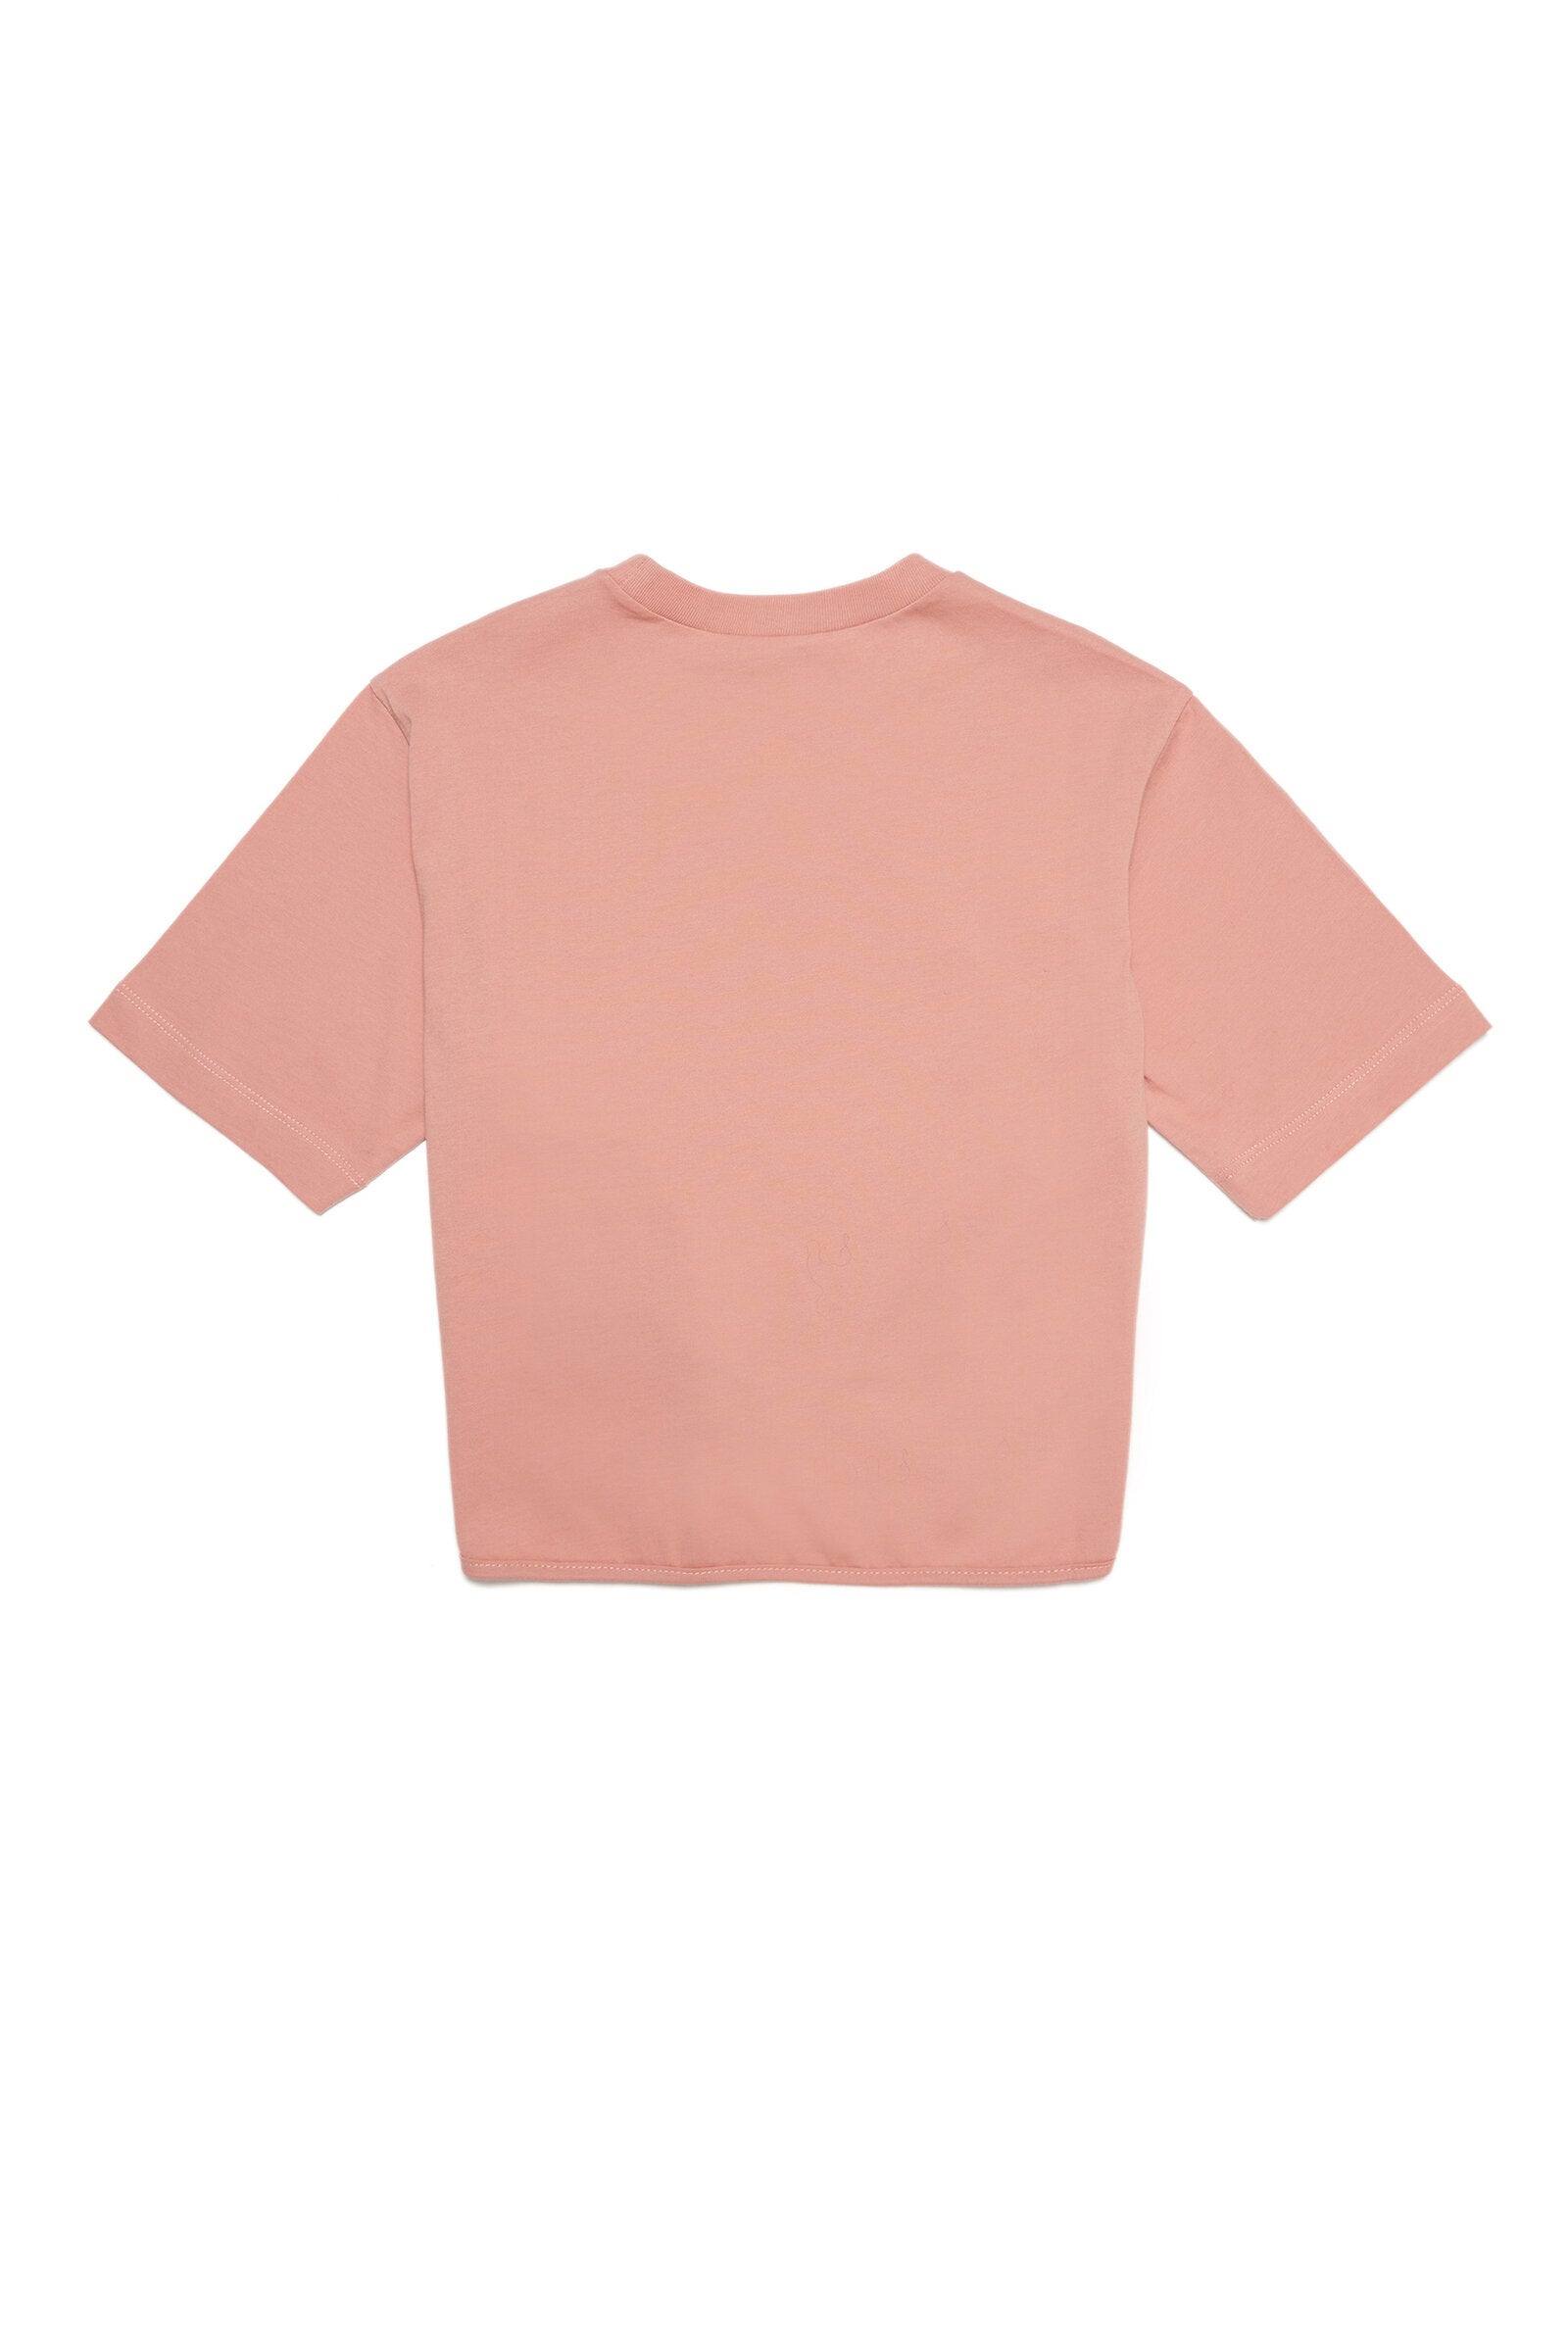 Antique pink jersey t-shirt with knotting and Stadium logo